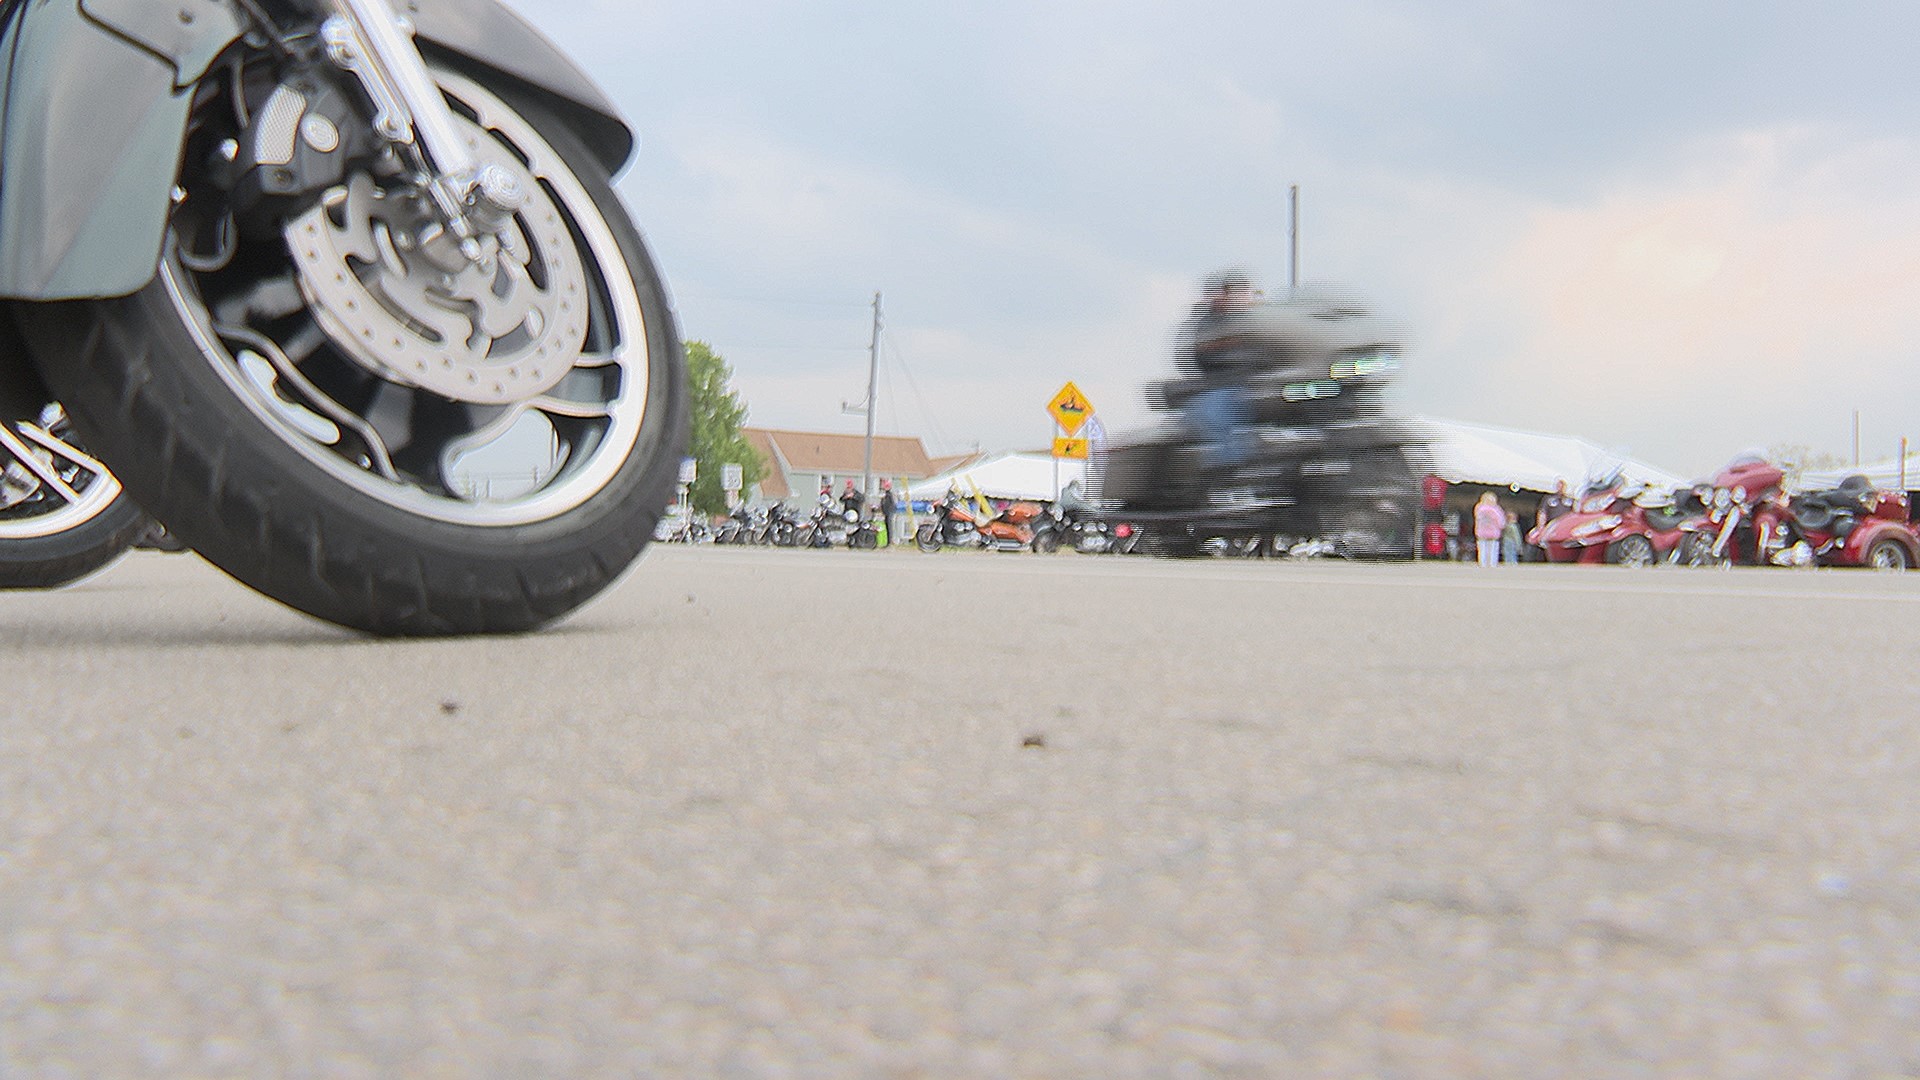 Tens of thousands expected at Blessing of the Bikes in Baldwin